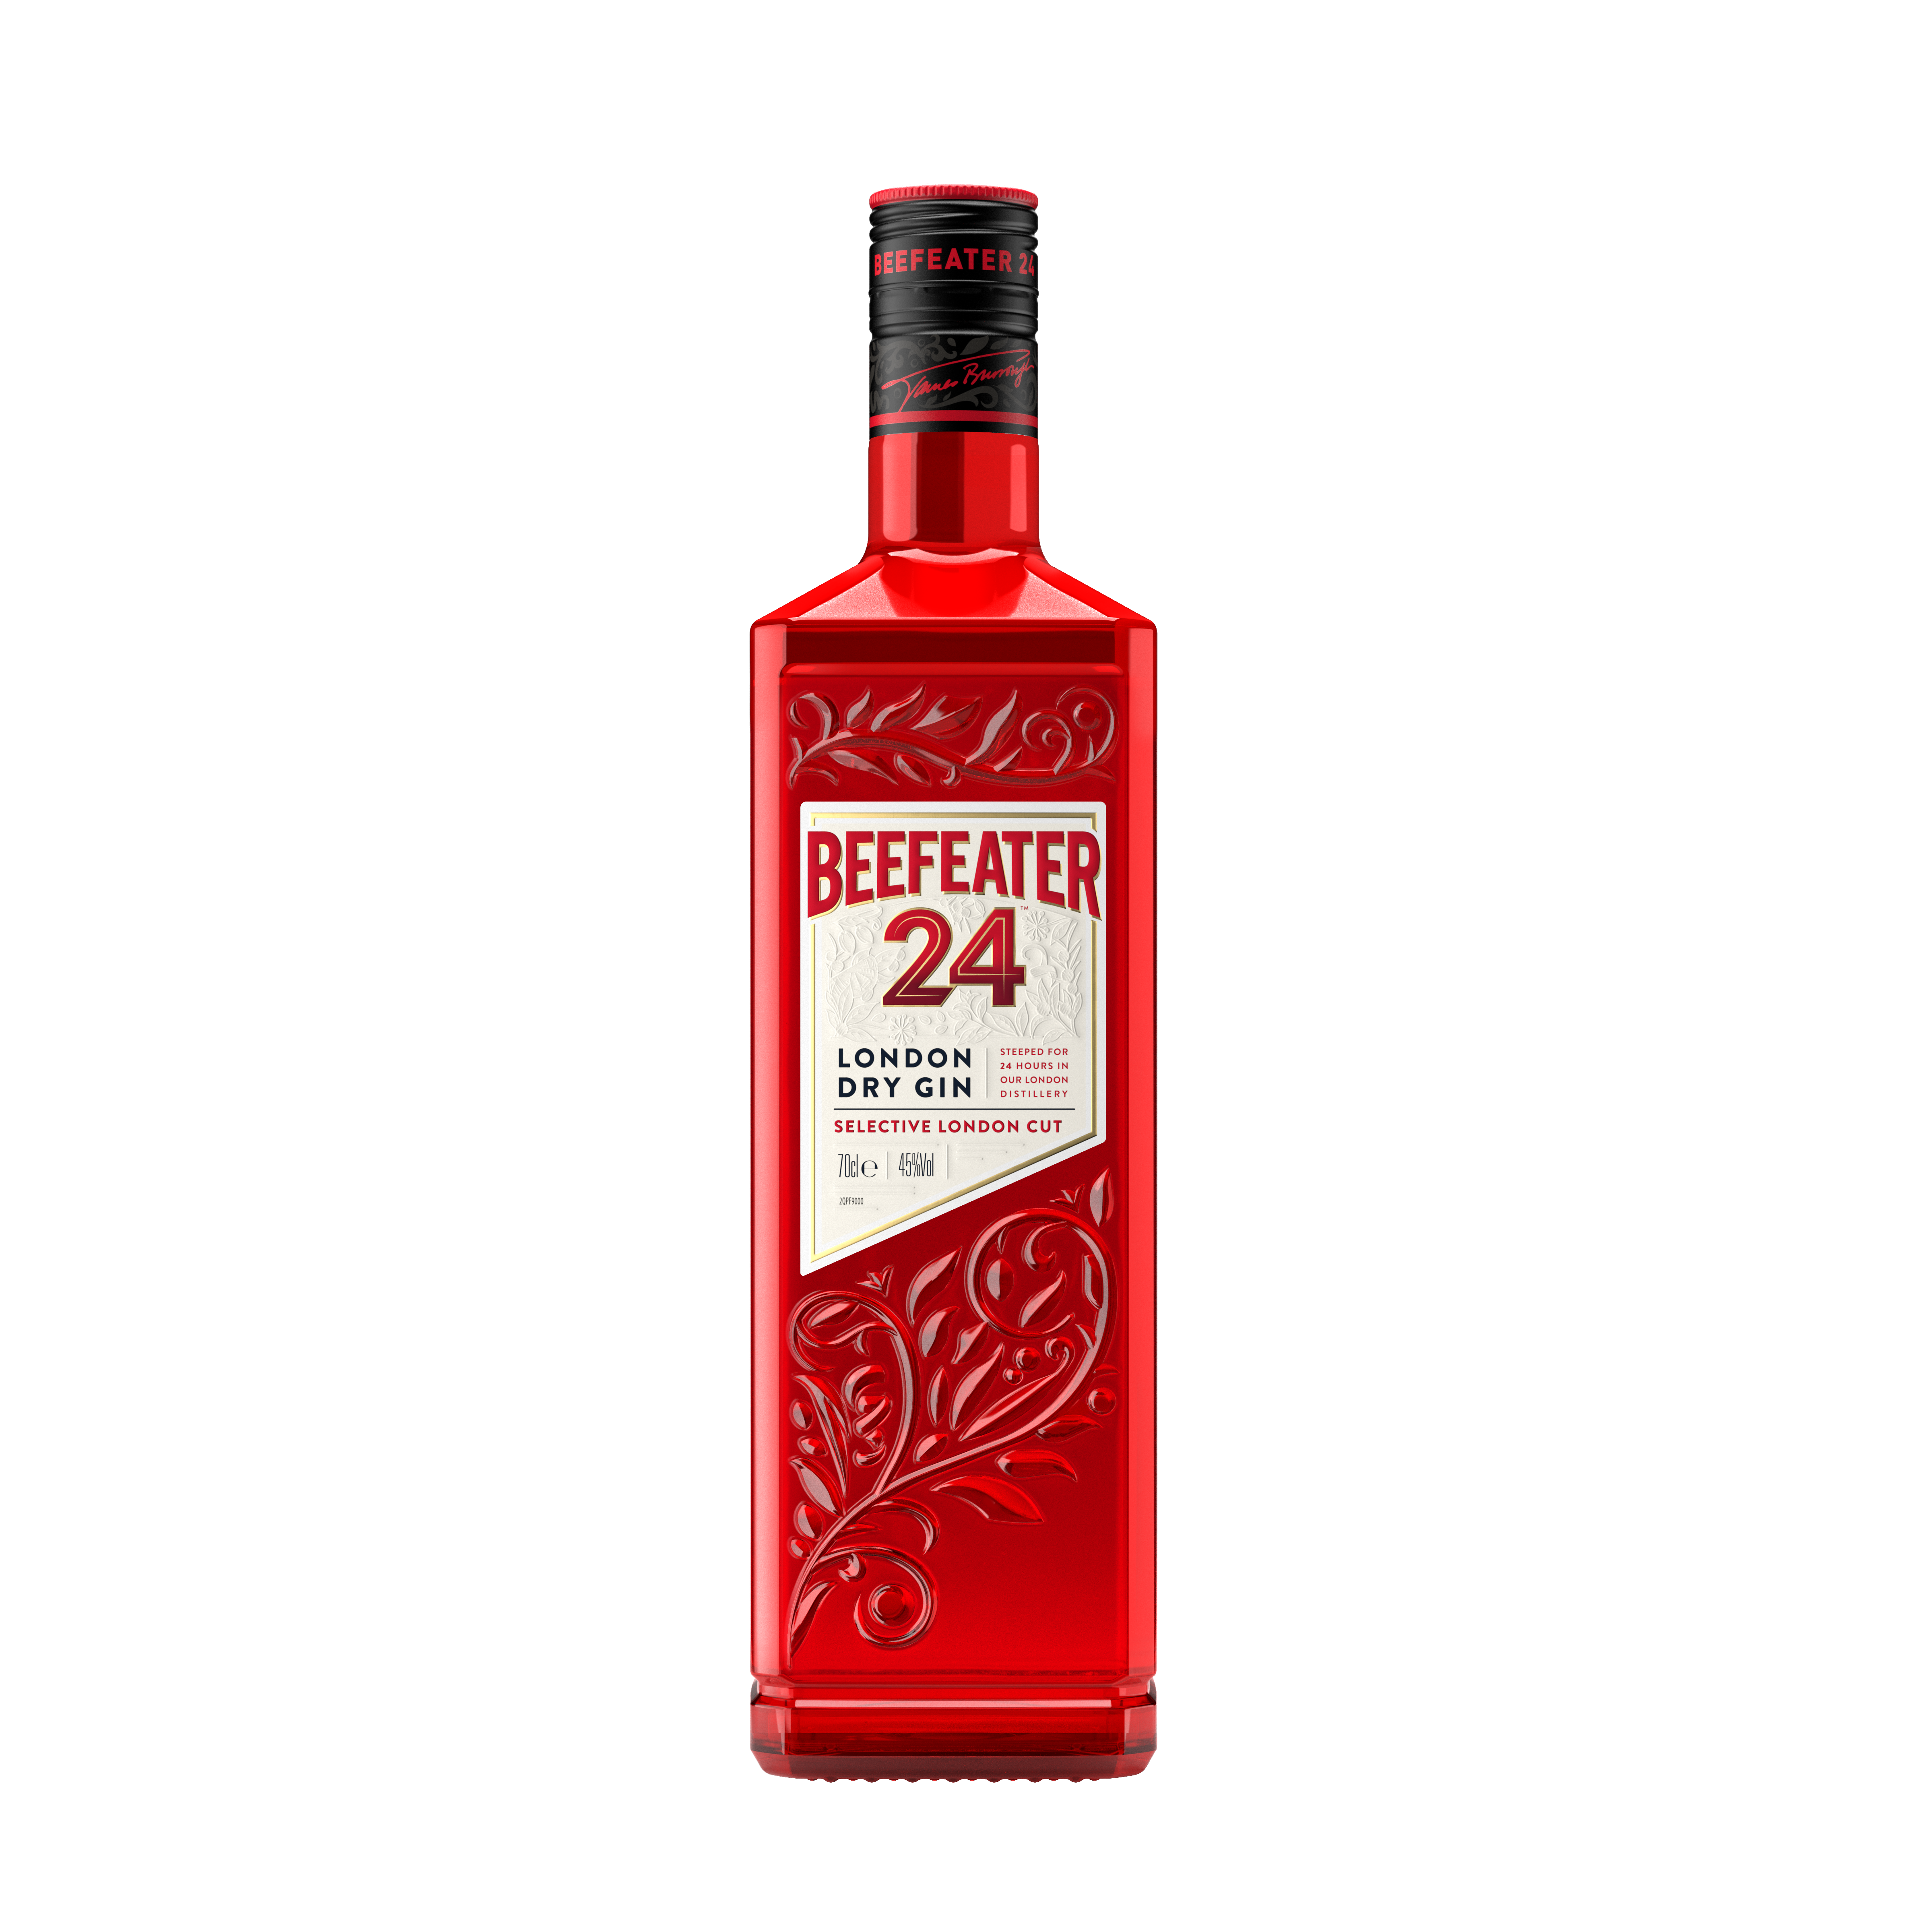 beefeater24 01 aspect ratio 735 735